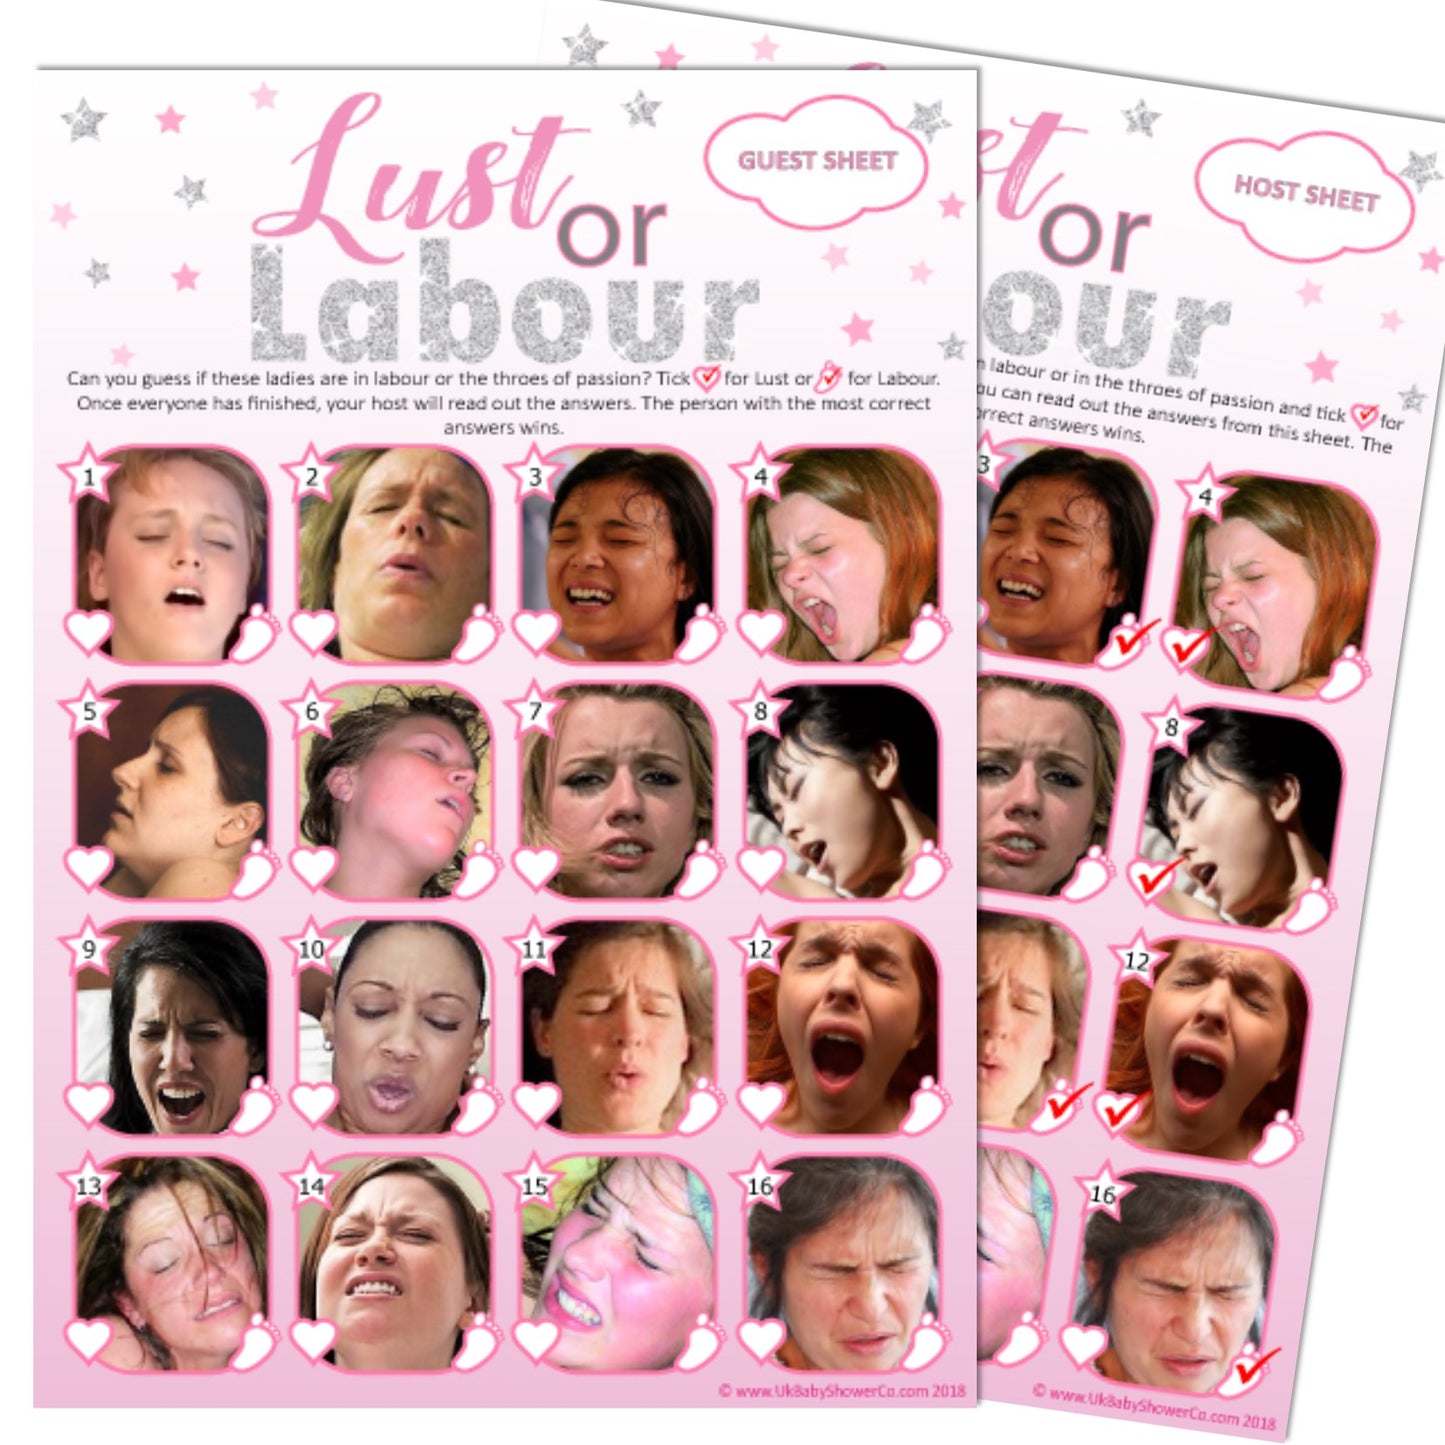 Labour or Lust Party Game - Uk Baby Shower Co ltd